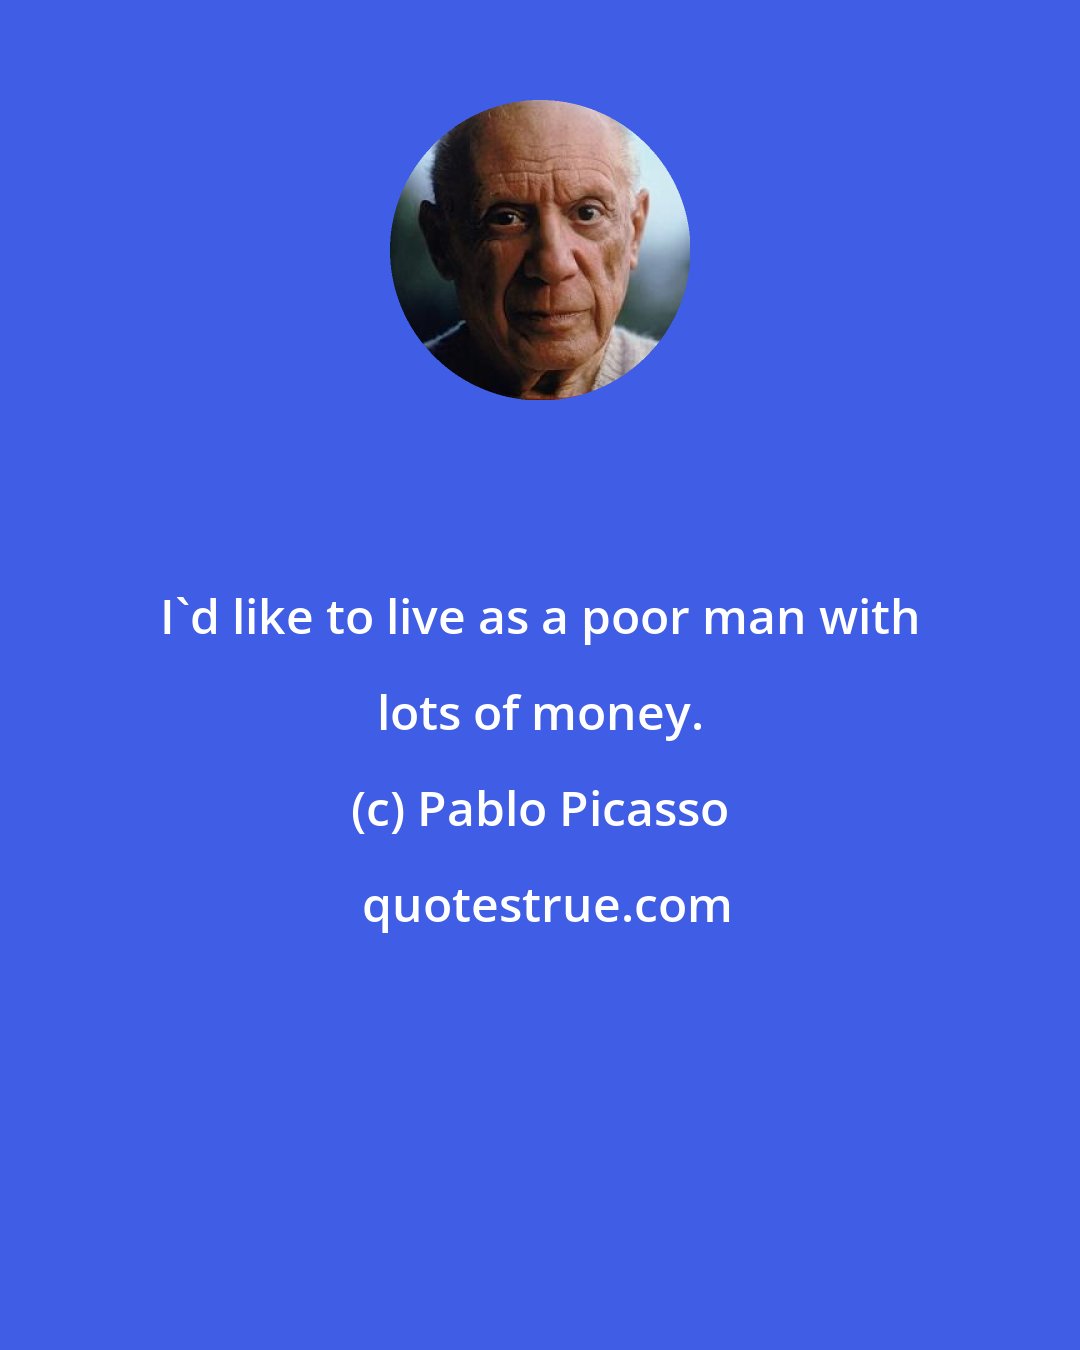 Pablo Picasso: I'd like to live as a poor man with lots of money.